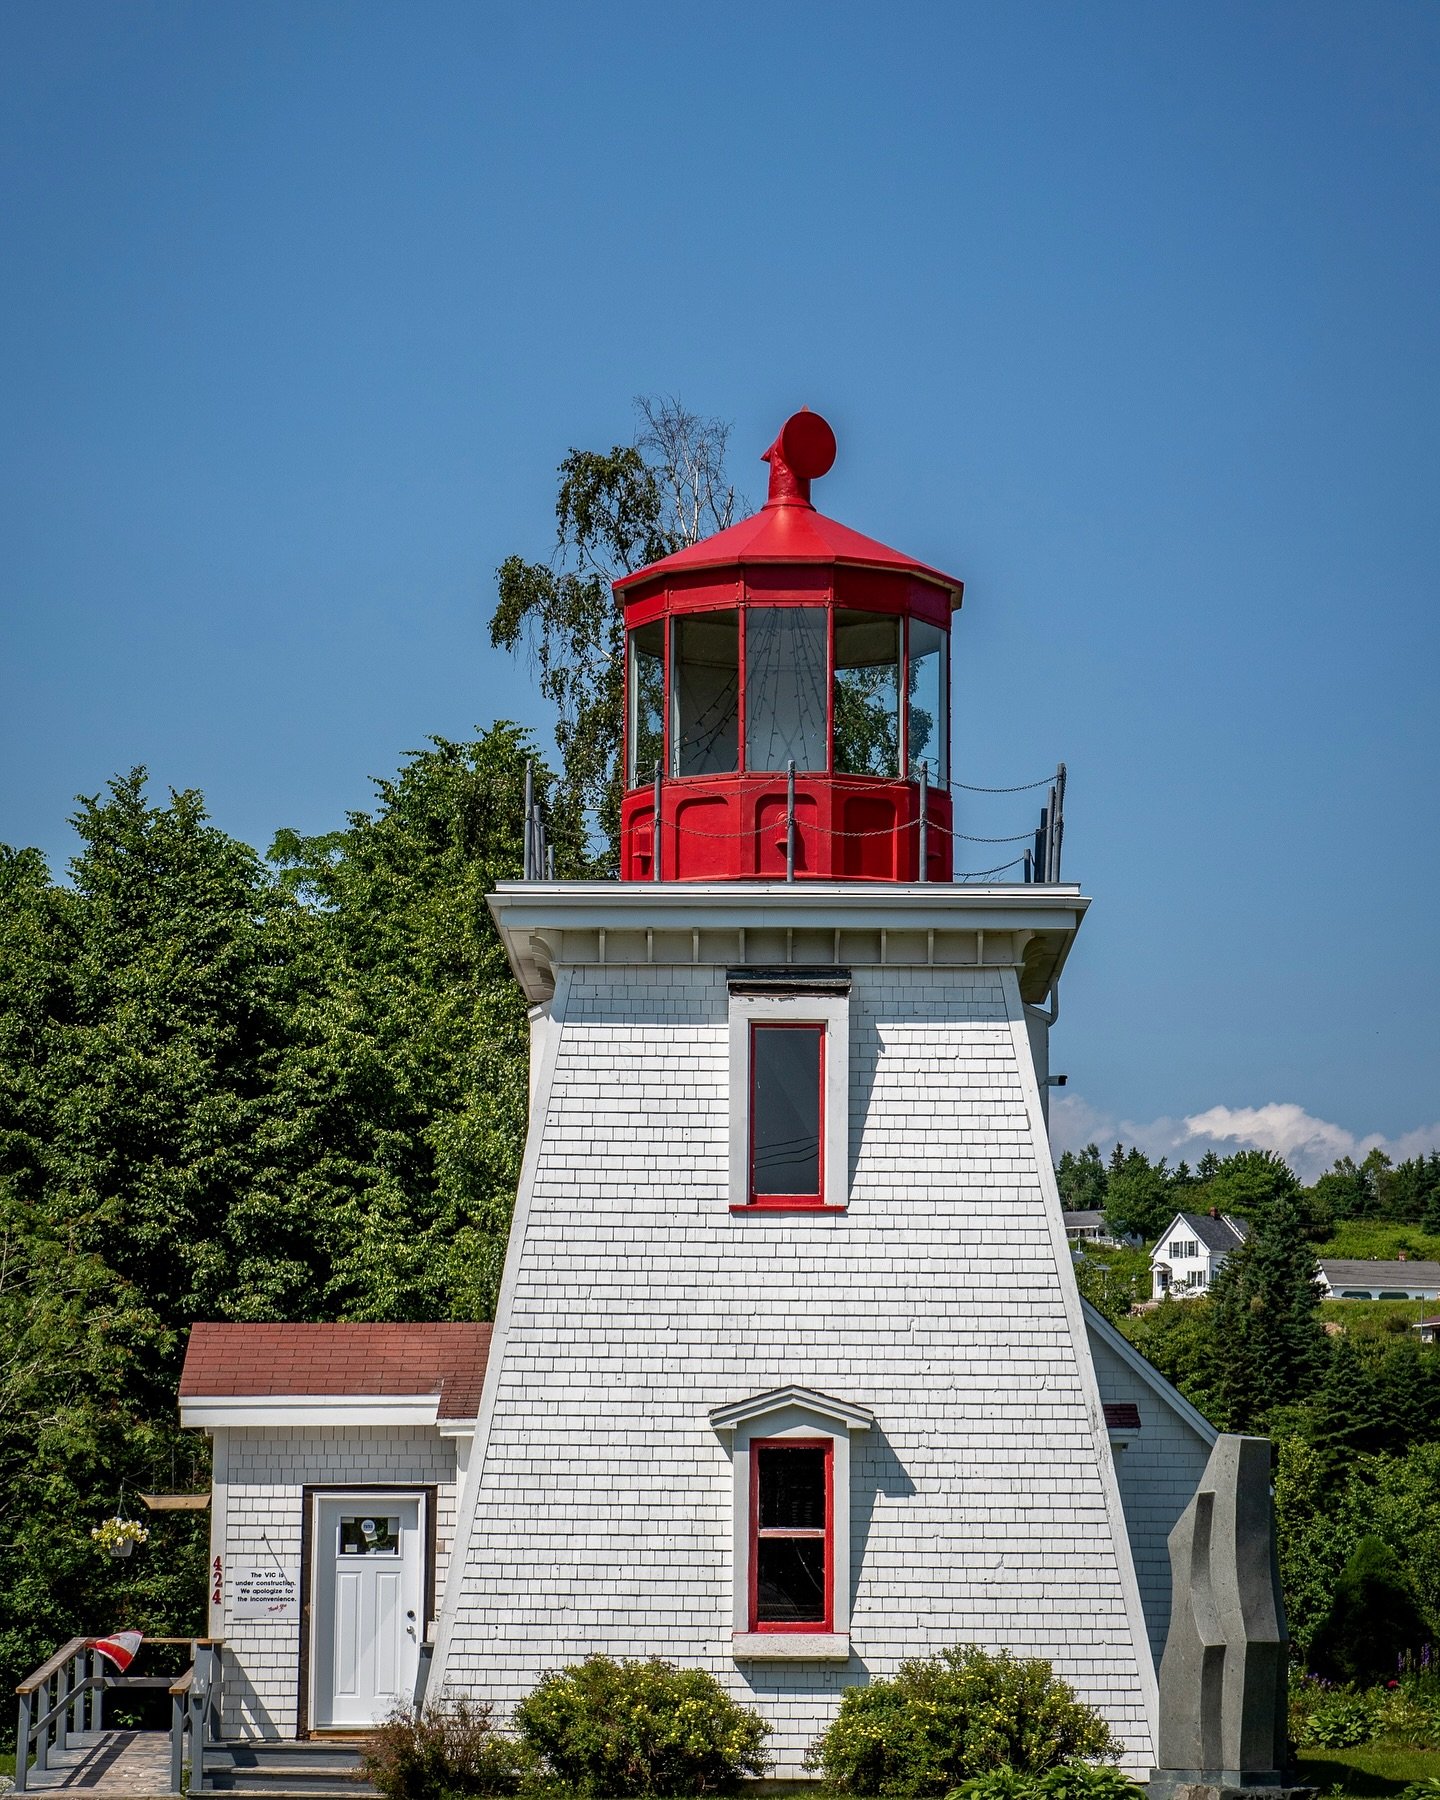 Discover the charm of the St. Martins Lighthouse, where history and scenic beauty converge! Built in 1983, this lighthouse proudly displays the lantern room from the 1883 Quaco Head Lighthouse and serves as a welcoming Visitor Information Centre. Asc